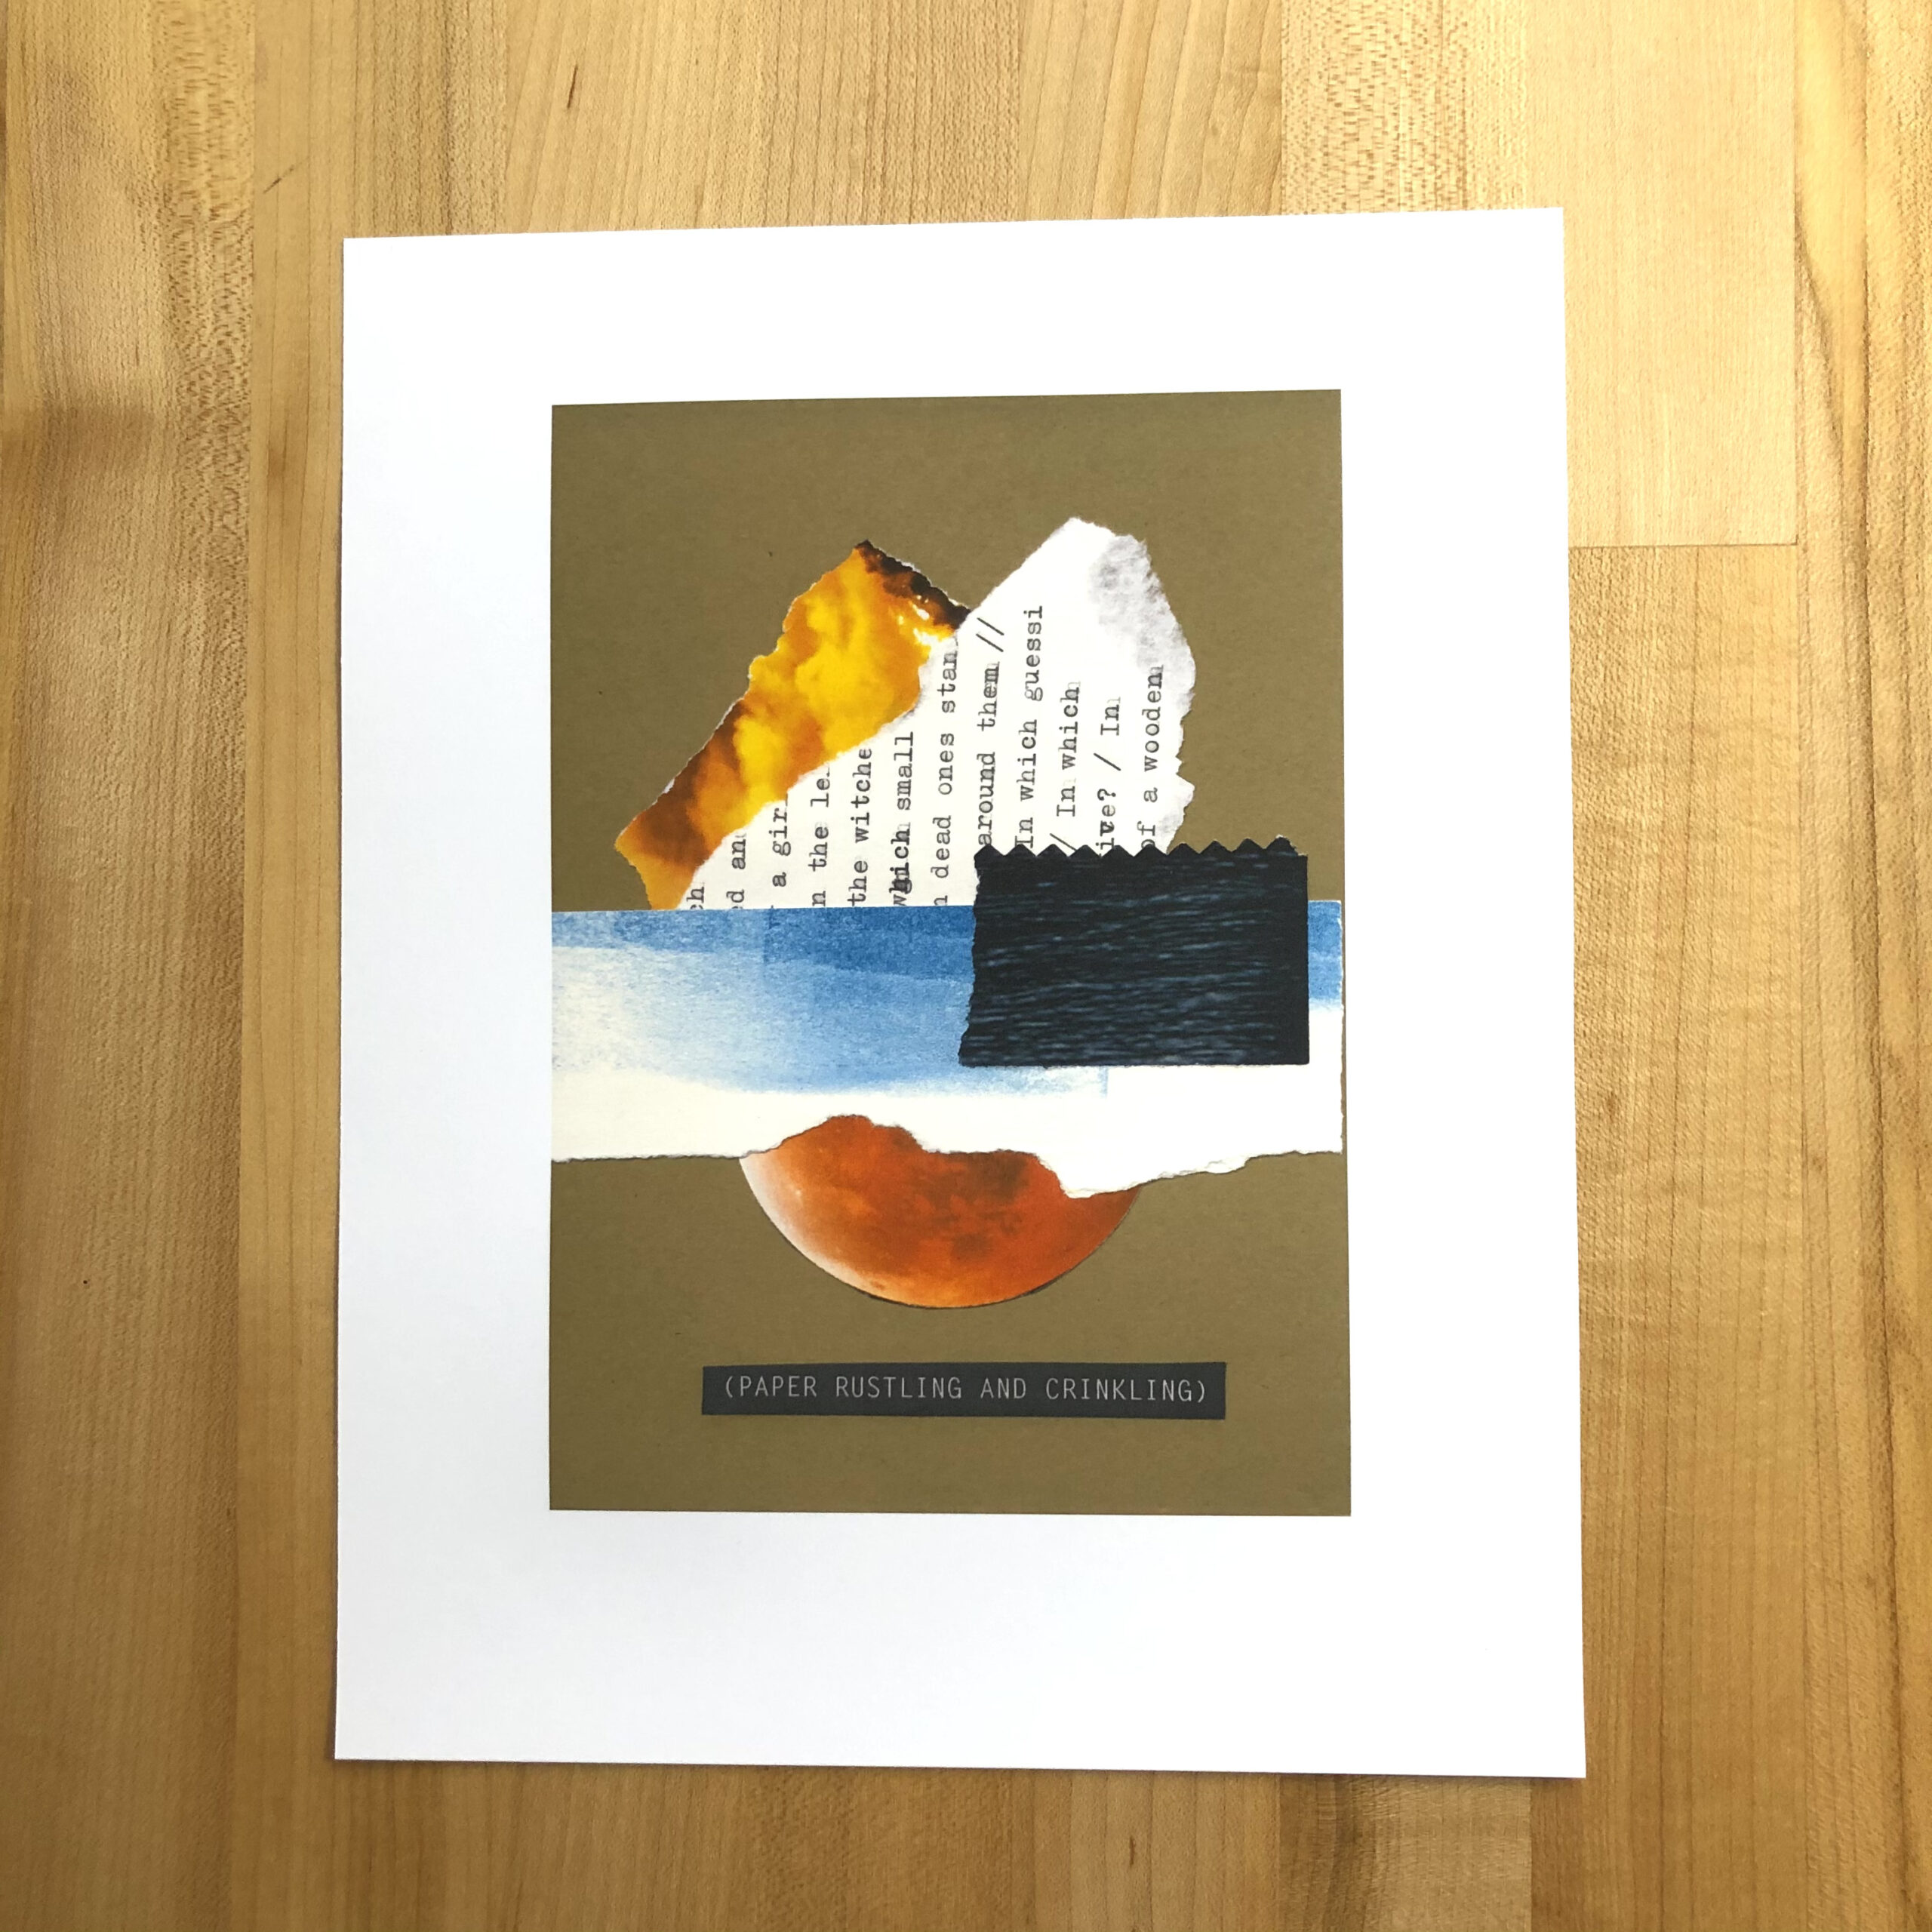 A high-quality ink jet print of an analog collage, lying on a maple tabletop. The collage features torn shapes of fire, typescript, blue ink swipe, dark ocean layered above a red planet. The closed-caption title below says “(PAPER RUSTLING AND CRINKLING).”